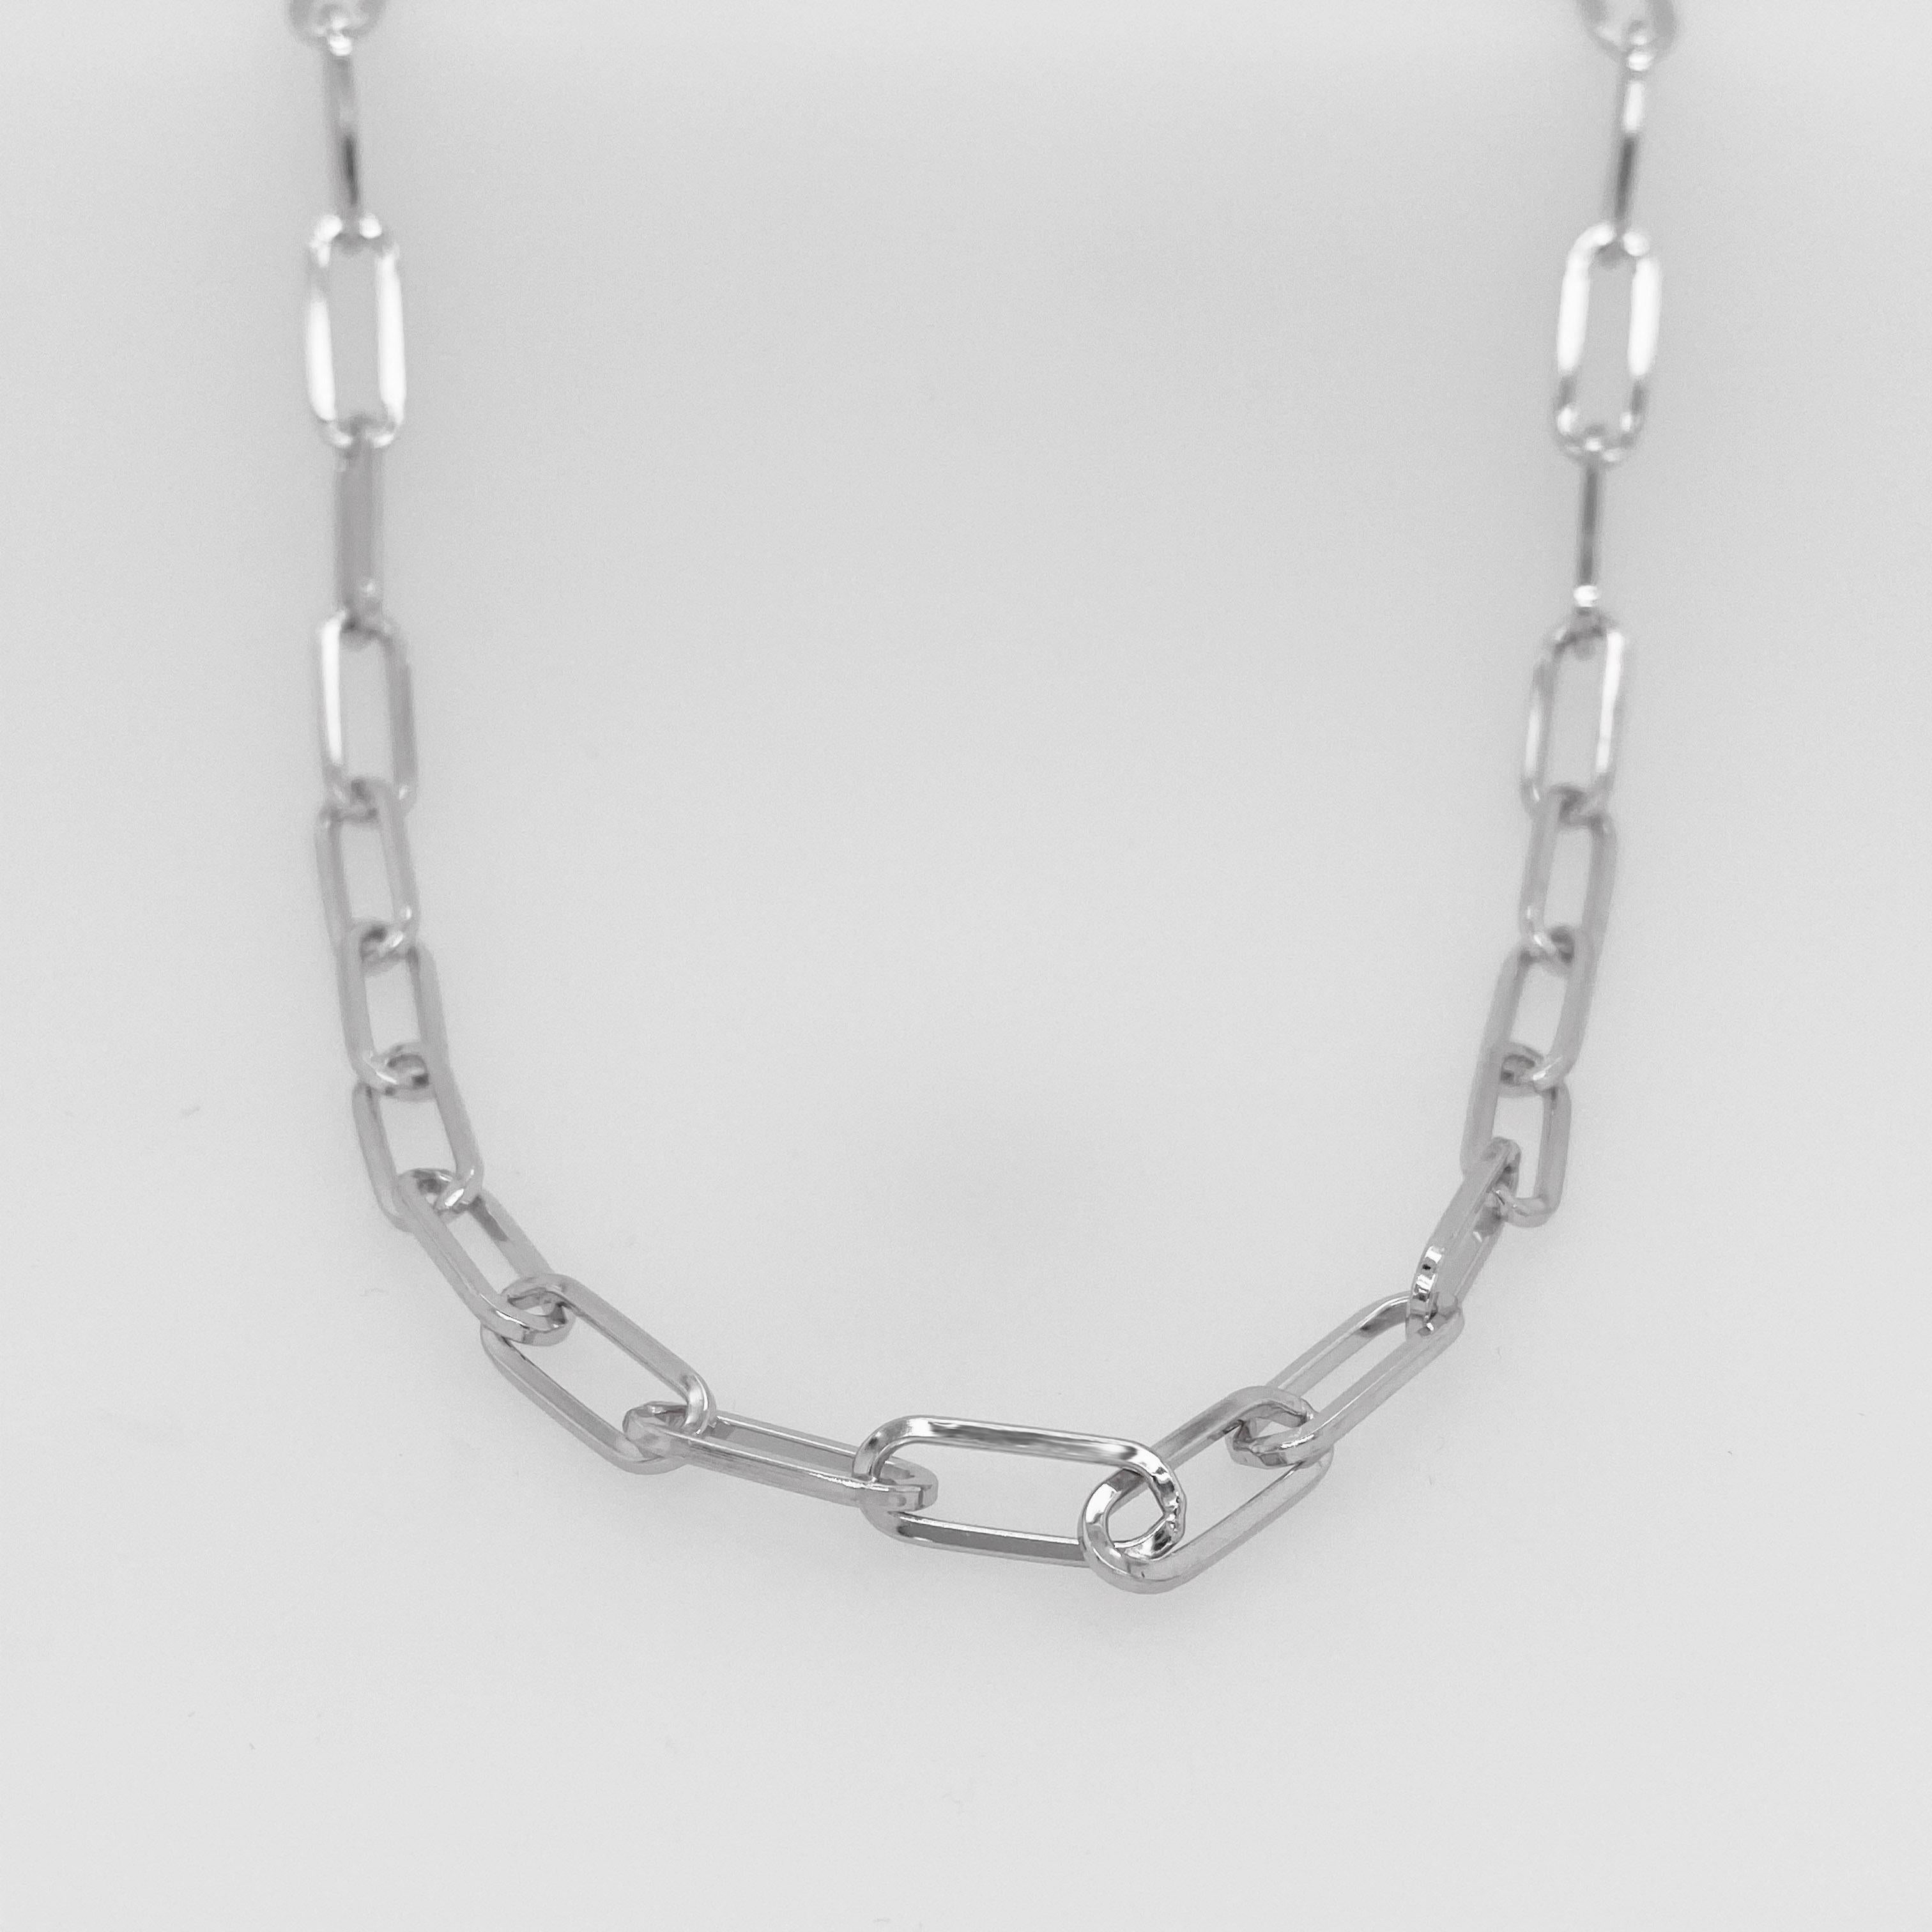 Sterling Silver Paperclip Chain is the 2020 Best Design!  The details are as follows:

Link Width: 3mm/.26in
Link Height: 14.93mm/.59in
Chain Length: 20in
Weight: 9.95

This chain is available in 10 inches (6.5mm paperclip bracelet) 16 inches, 18